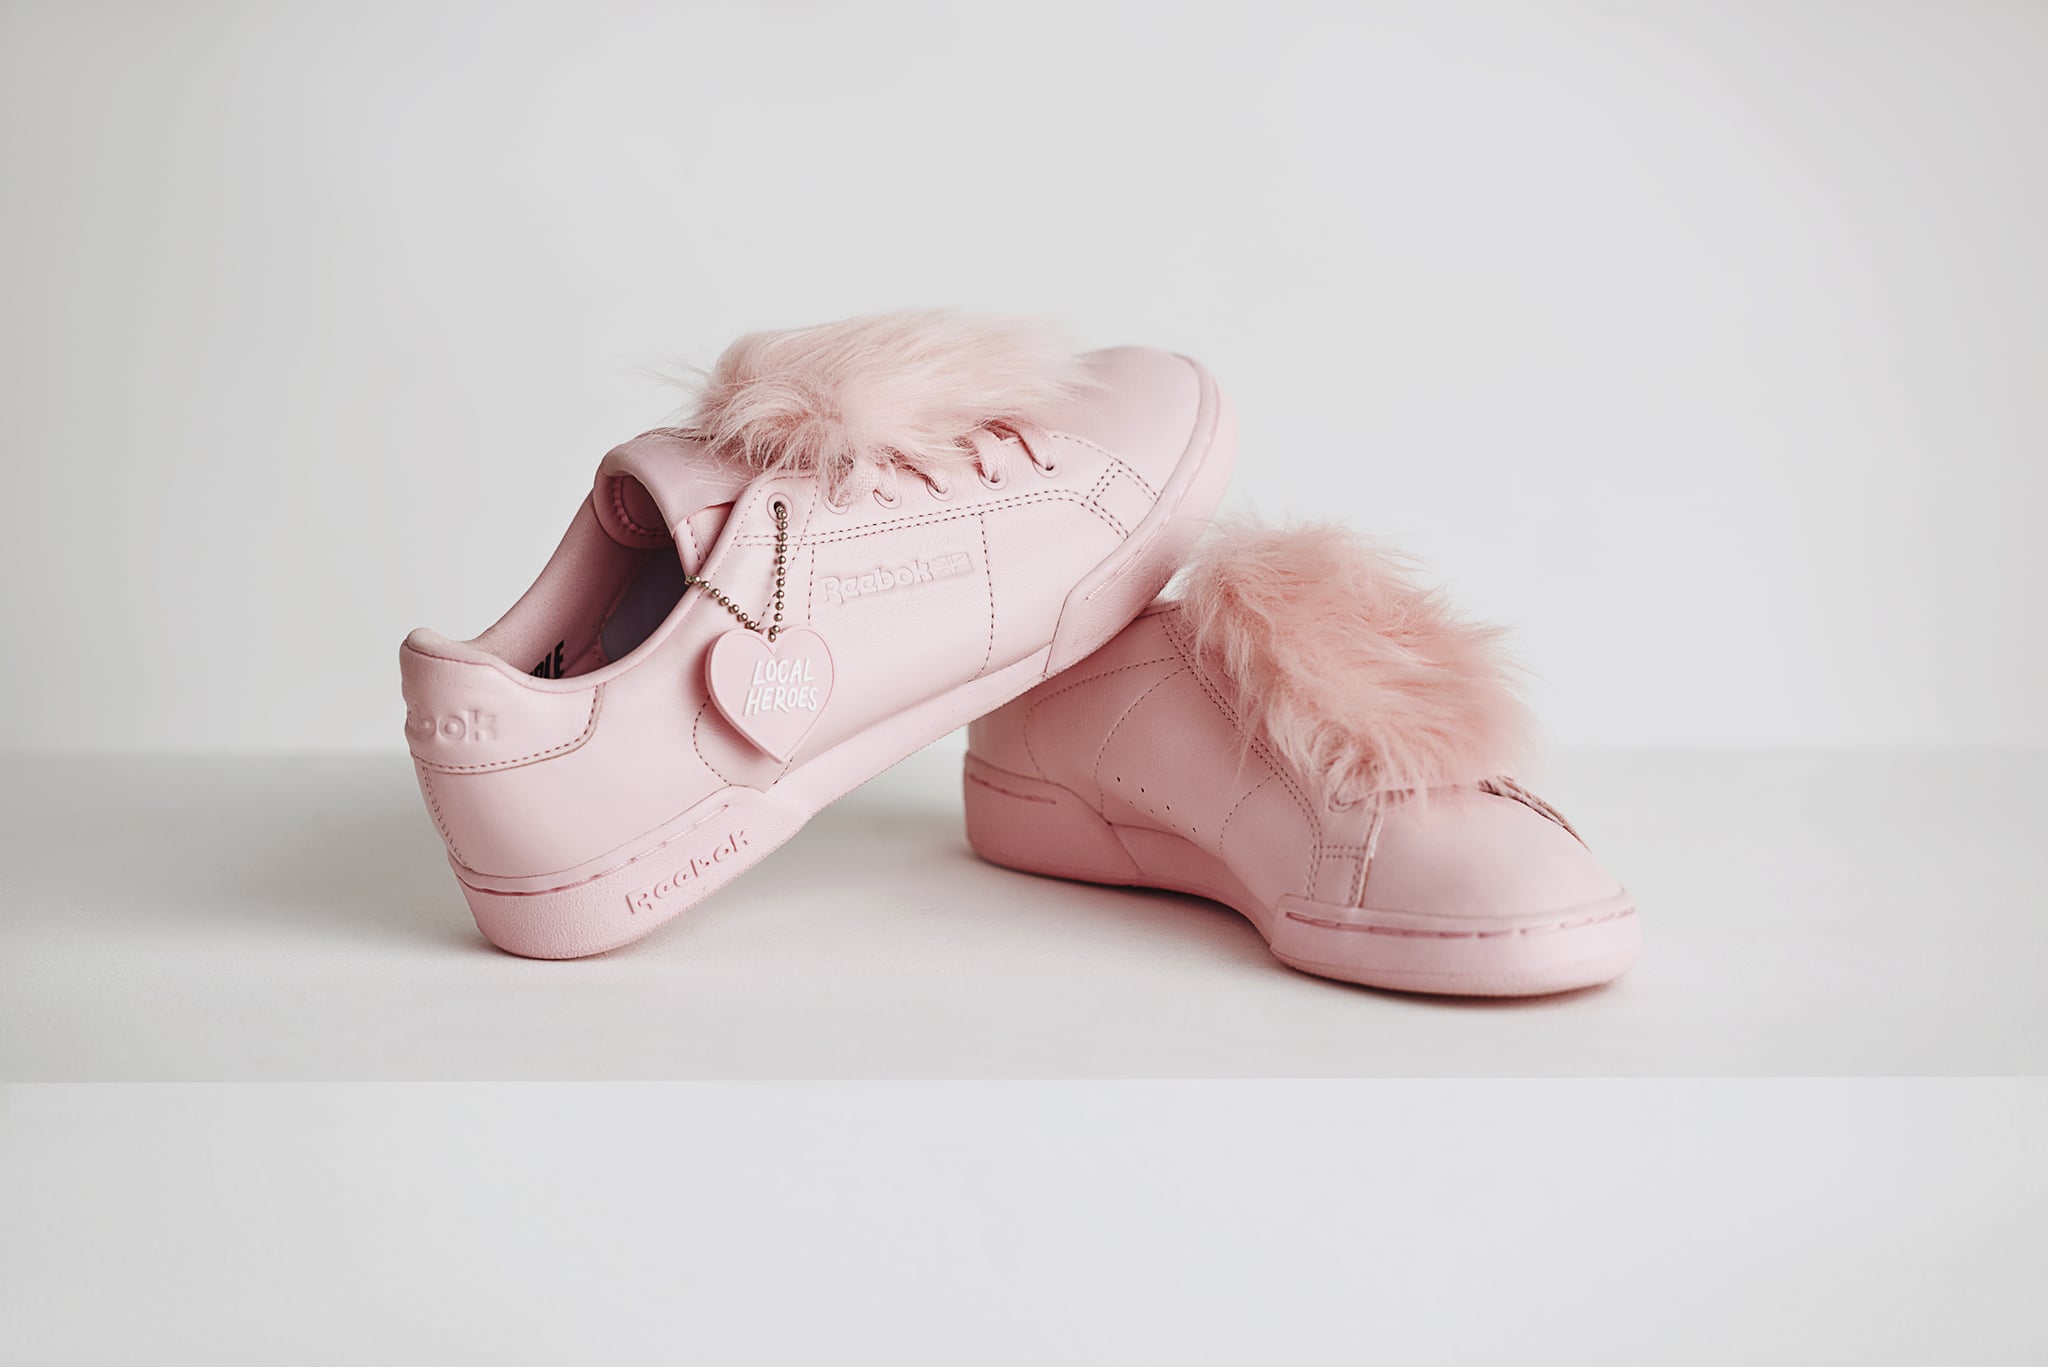 Missionaris Verlichting Trottoir The Reebok Classic x Local Heroes NPC II ($100) features just a swipe |  Everyone's Going Crazy For These Trendy Pink Sneakers | POPSUGAR Fashion  Photo 3